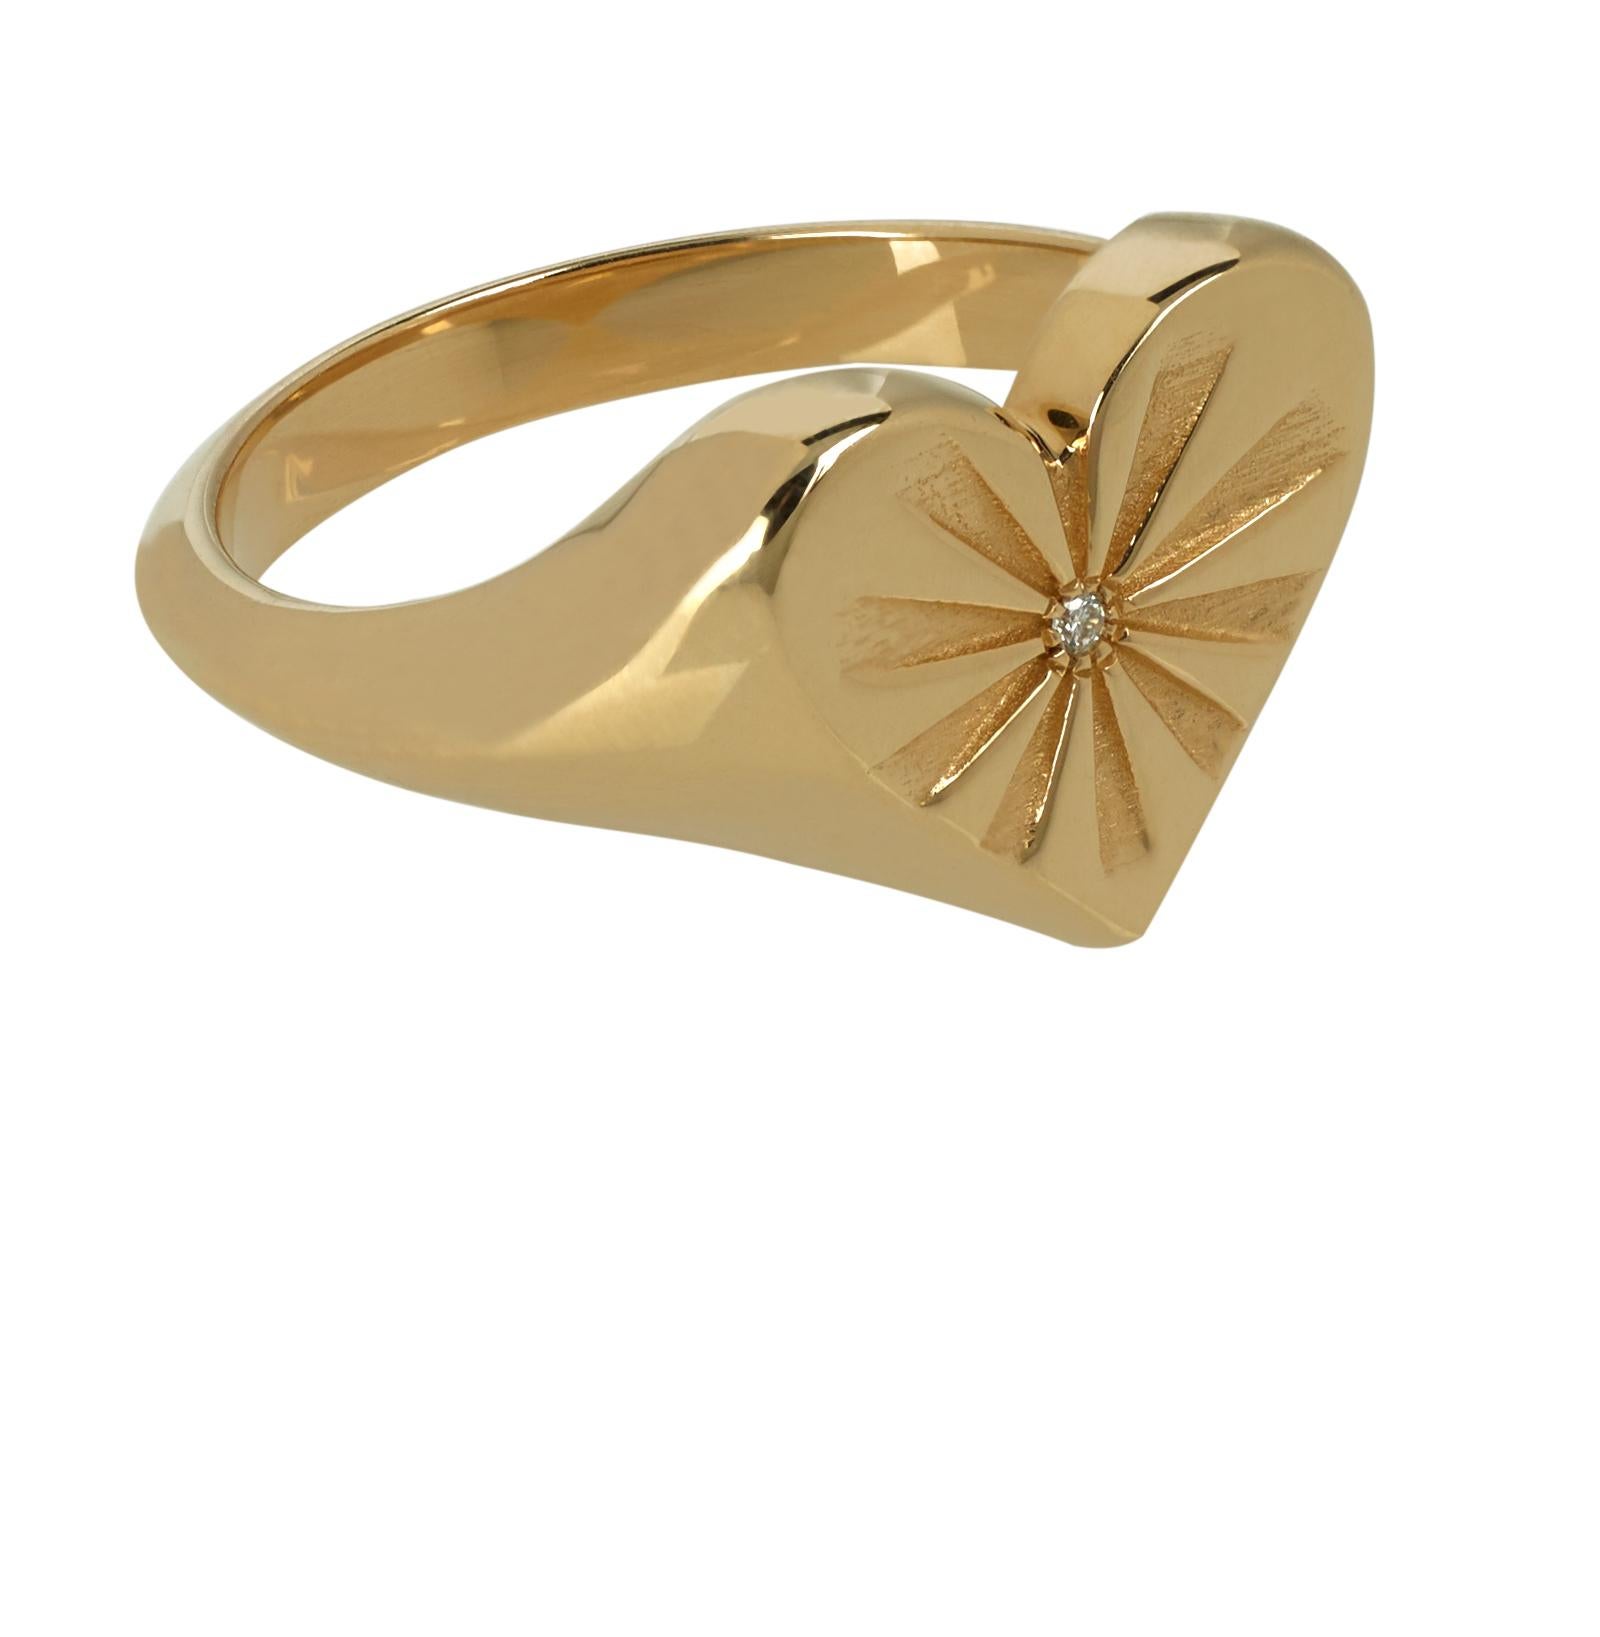 Marlo Laz's twist on a traditional signet, this heart of gold signet ring is an instant heirloom. This romantic valentine 14 karat love ring features a white diamond and sun-rays of sunshine. Perfect for Valentine's Day!

This ring is available in